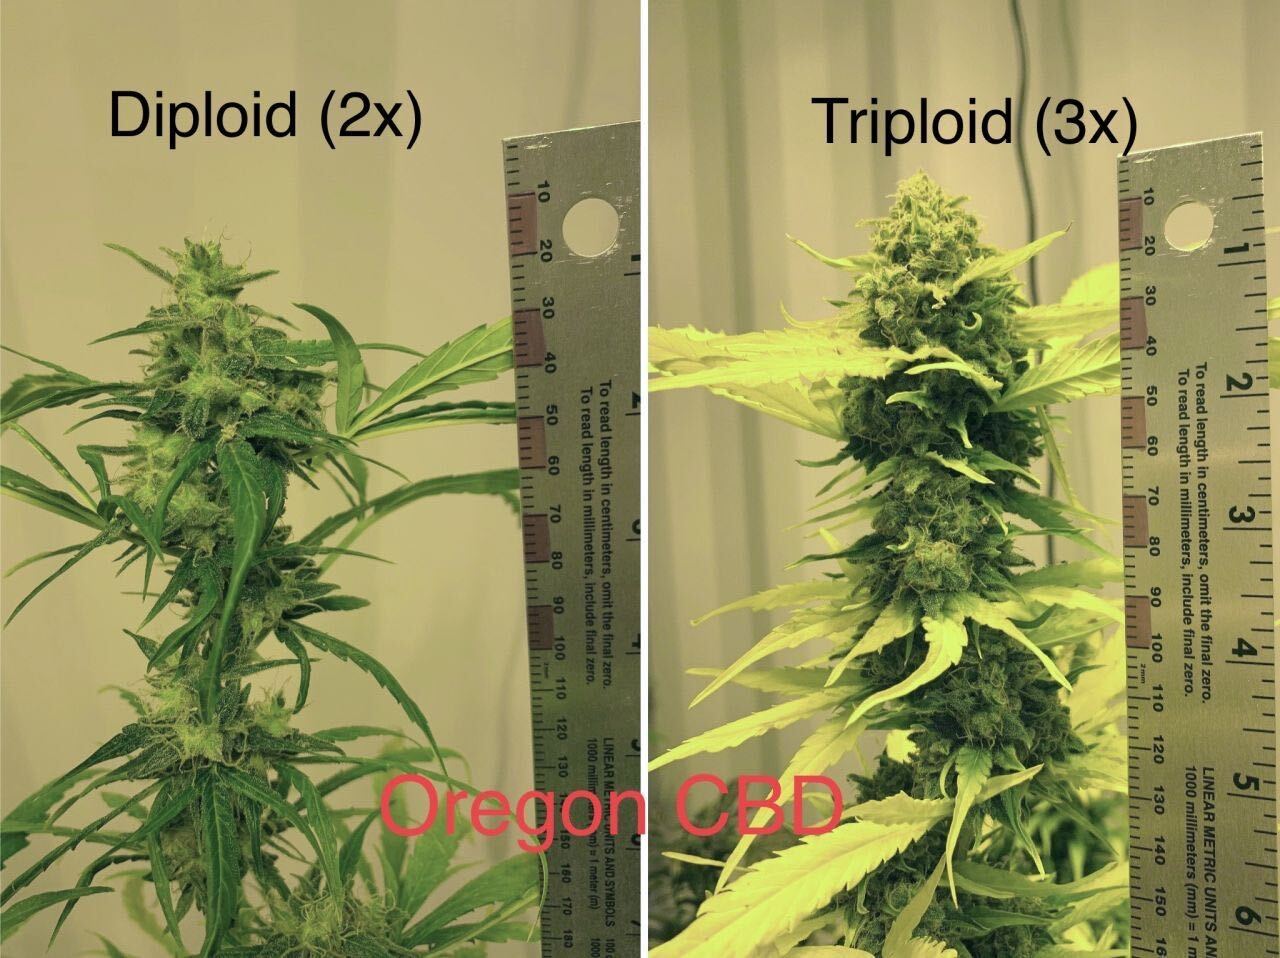 The difference in production is evident (Source: Oregon CBD)